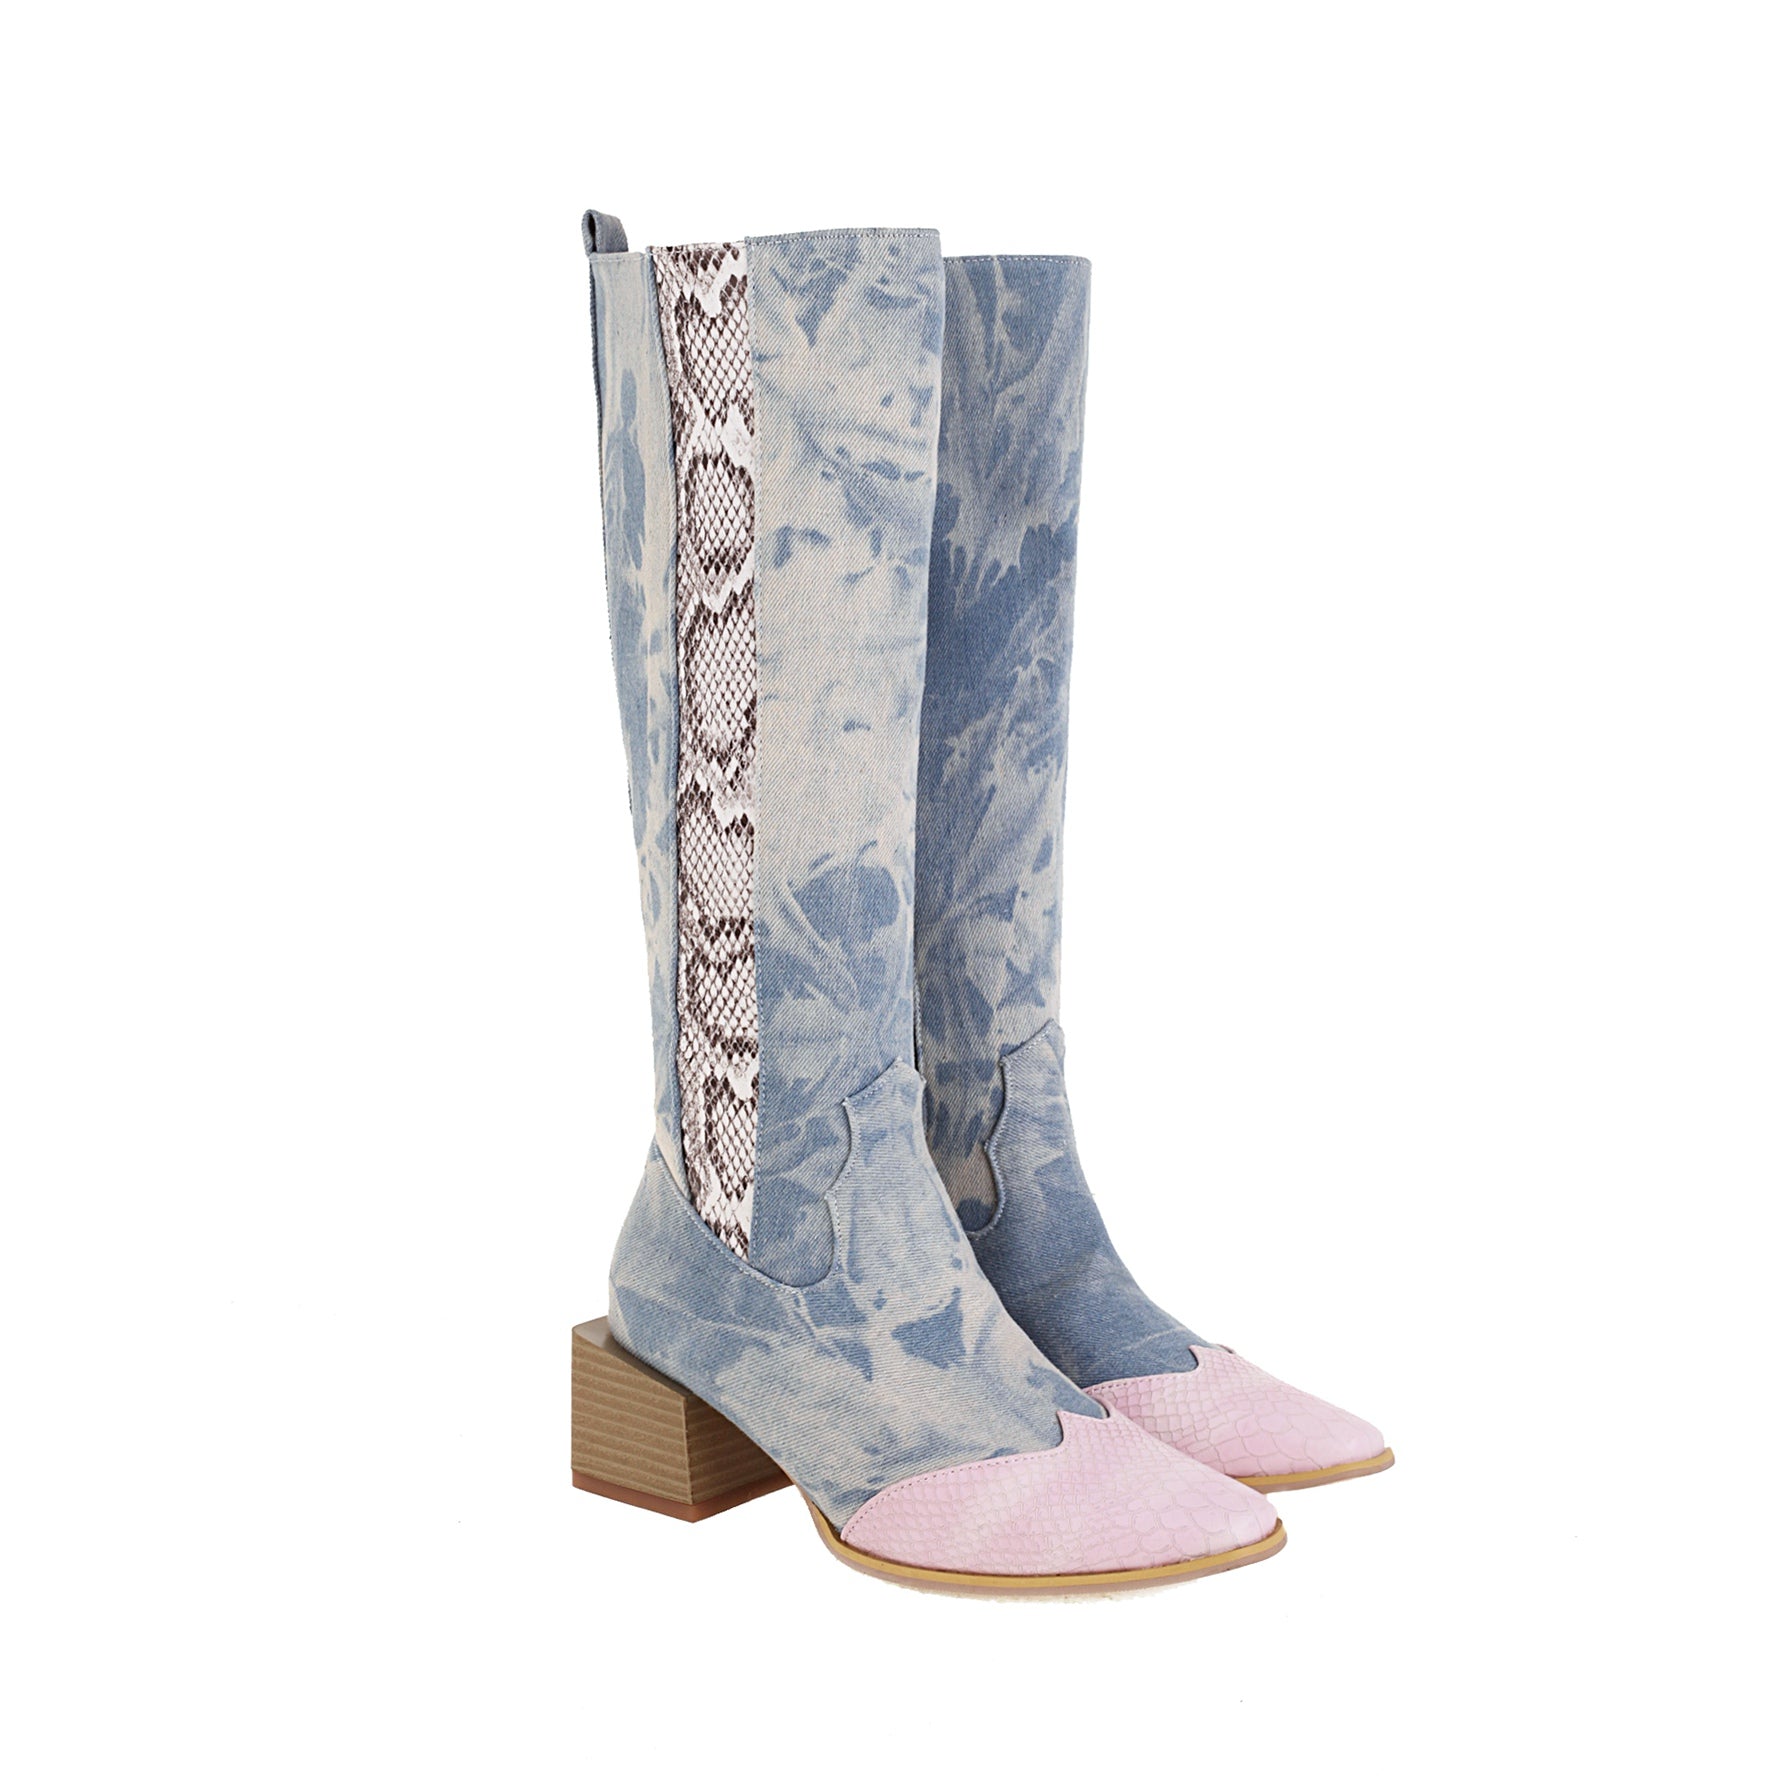 Bigsizeheels simple pointed toe over the knee boots-Pale blue freeshipping - bigsizeheel®-size5-size15 -All Plus Sizes Available!